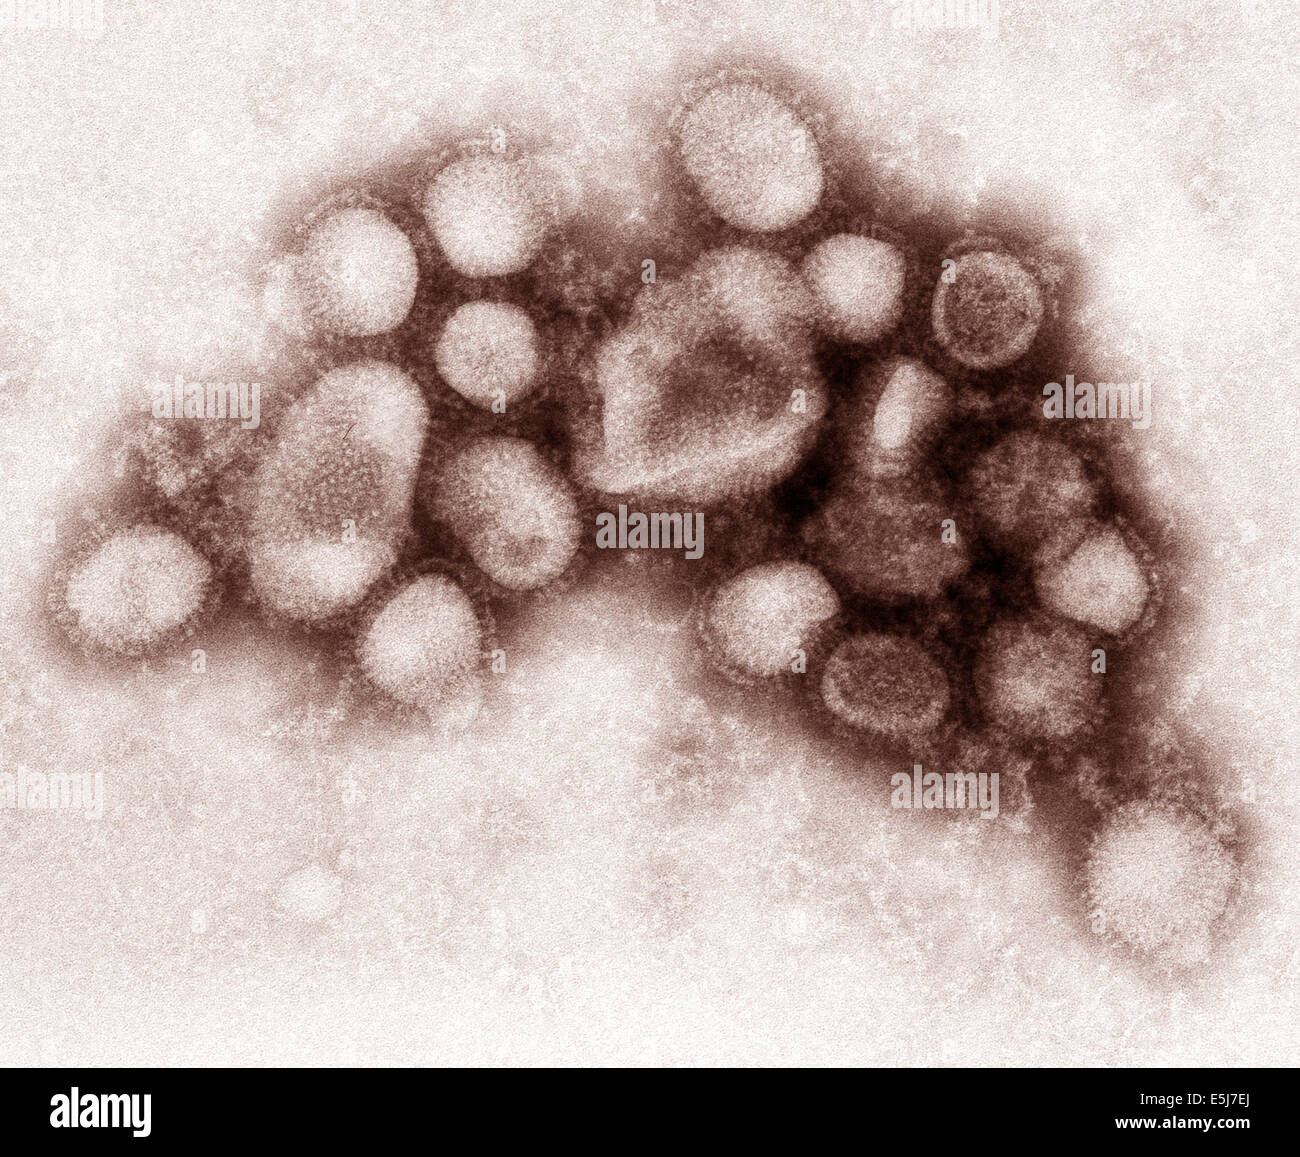 The H1N1 virus that caused a pandemic is now a regular human flu virus and continues to circulate seasonally worldwide. From the archives of Press Portrait Service. Stock Photo